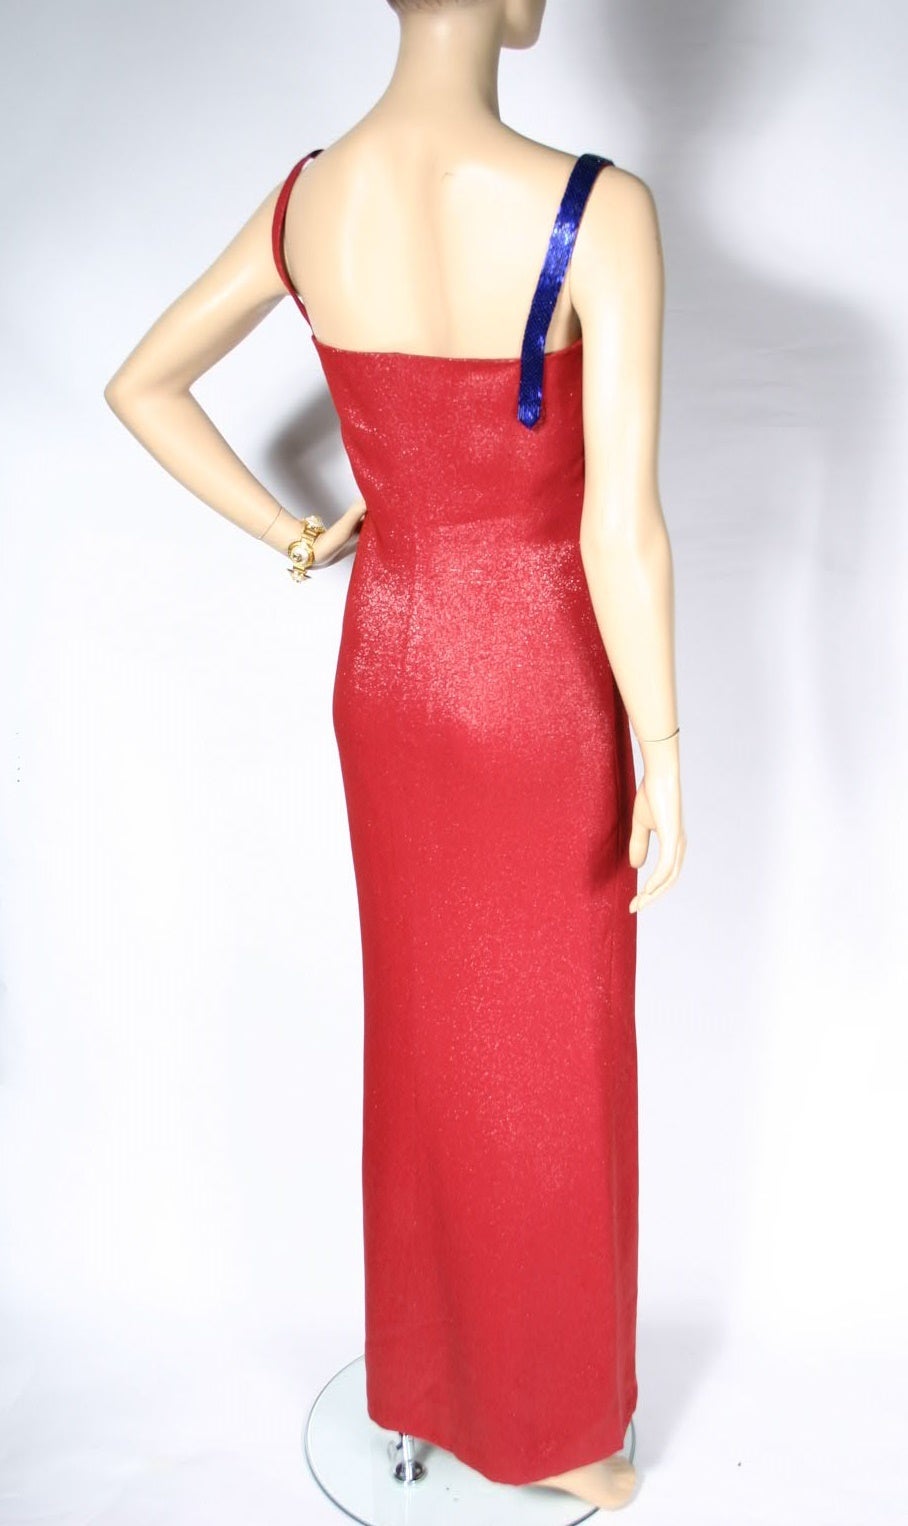 Collectible A/W 1997 GIANNI VERSACE COUTURE EMBELLISHED RED GOWN Sz 42 For Sale 2